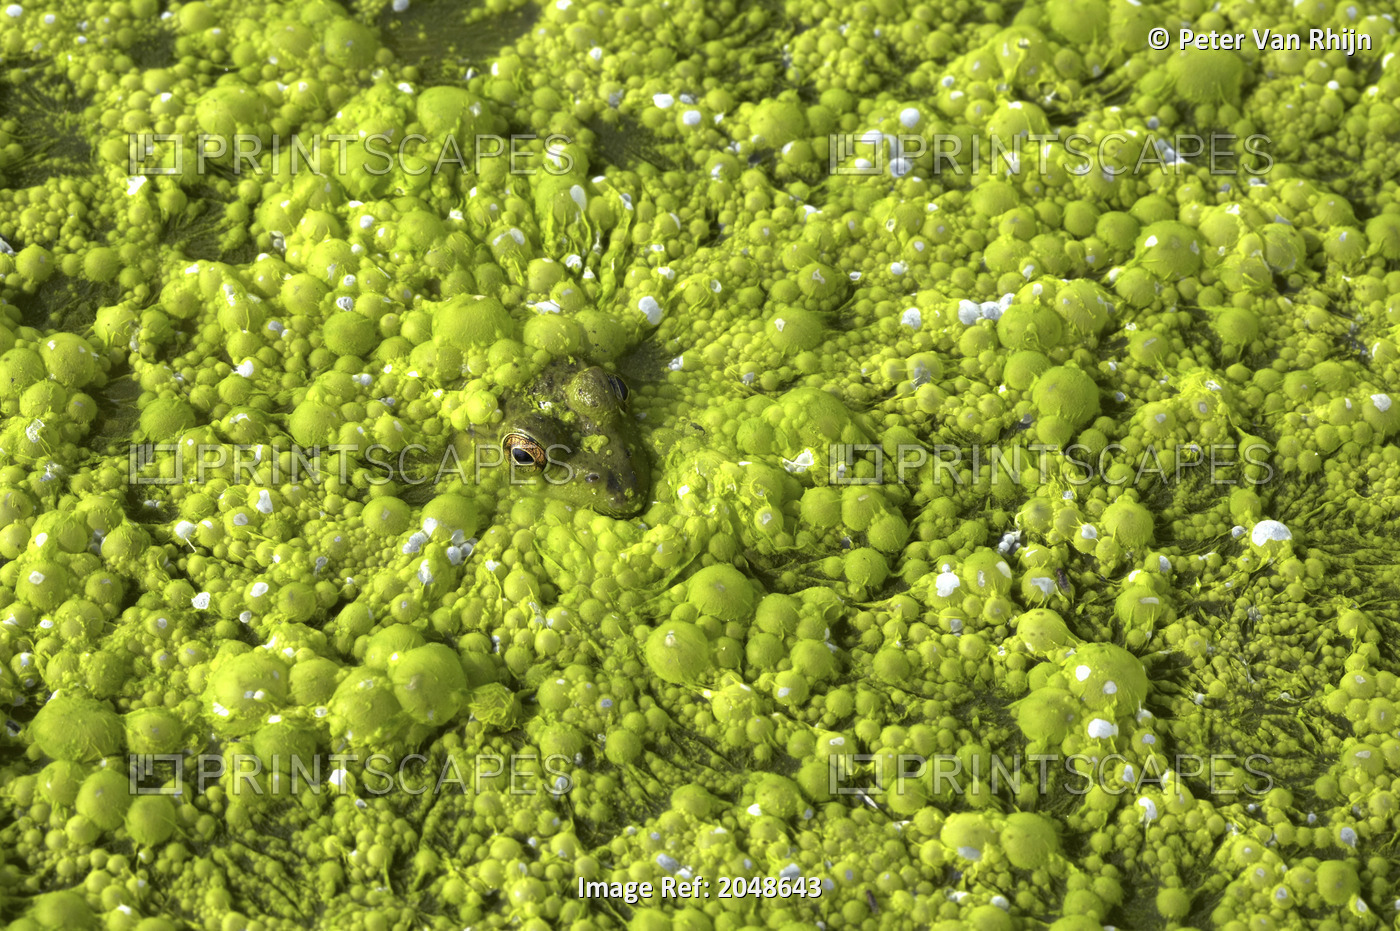 Close-Up Of Frog In Slimy Green Pond, Georgian Bay, Ontario, Canada